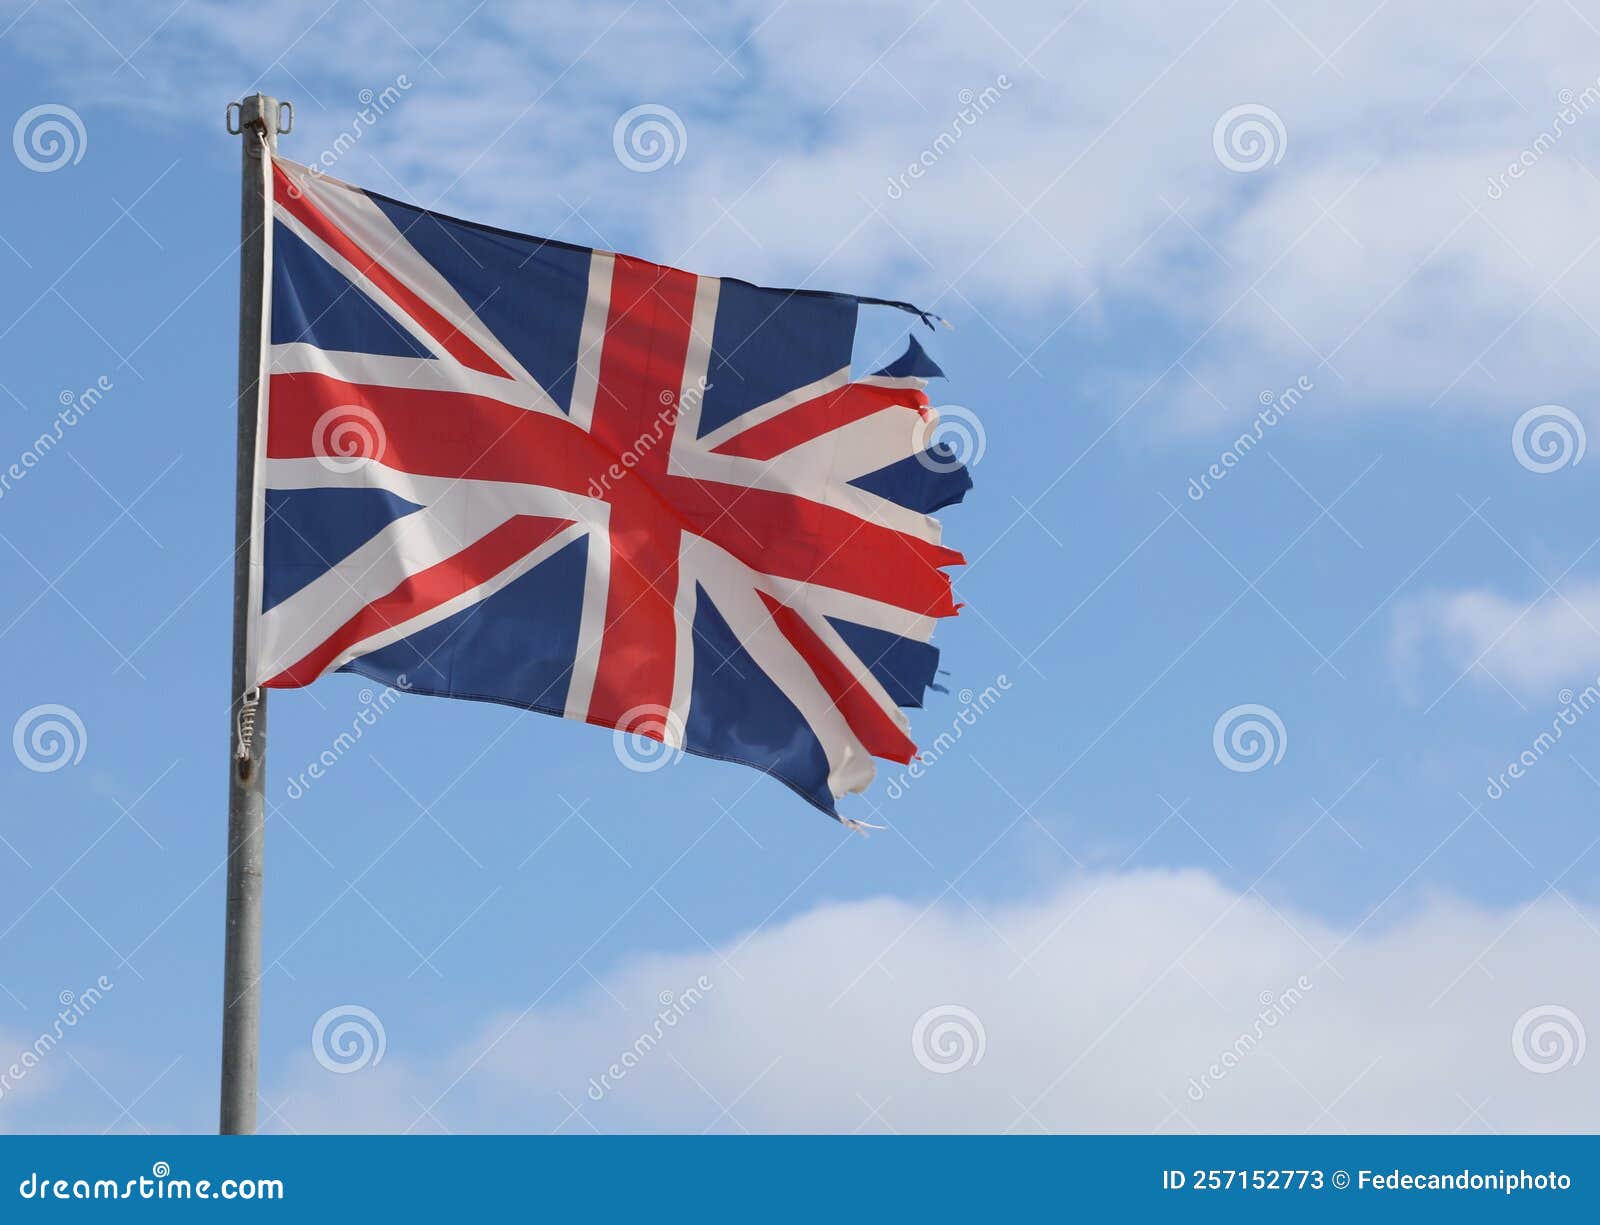 english flag ruined due to bad weather